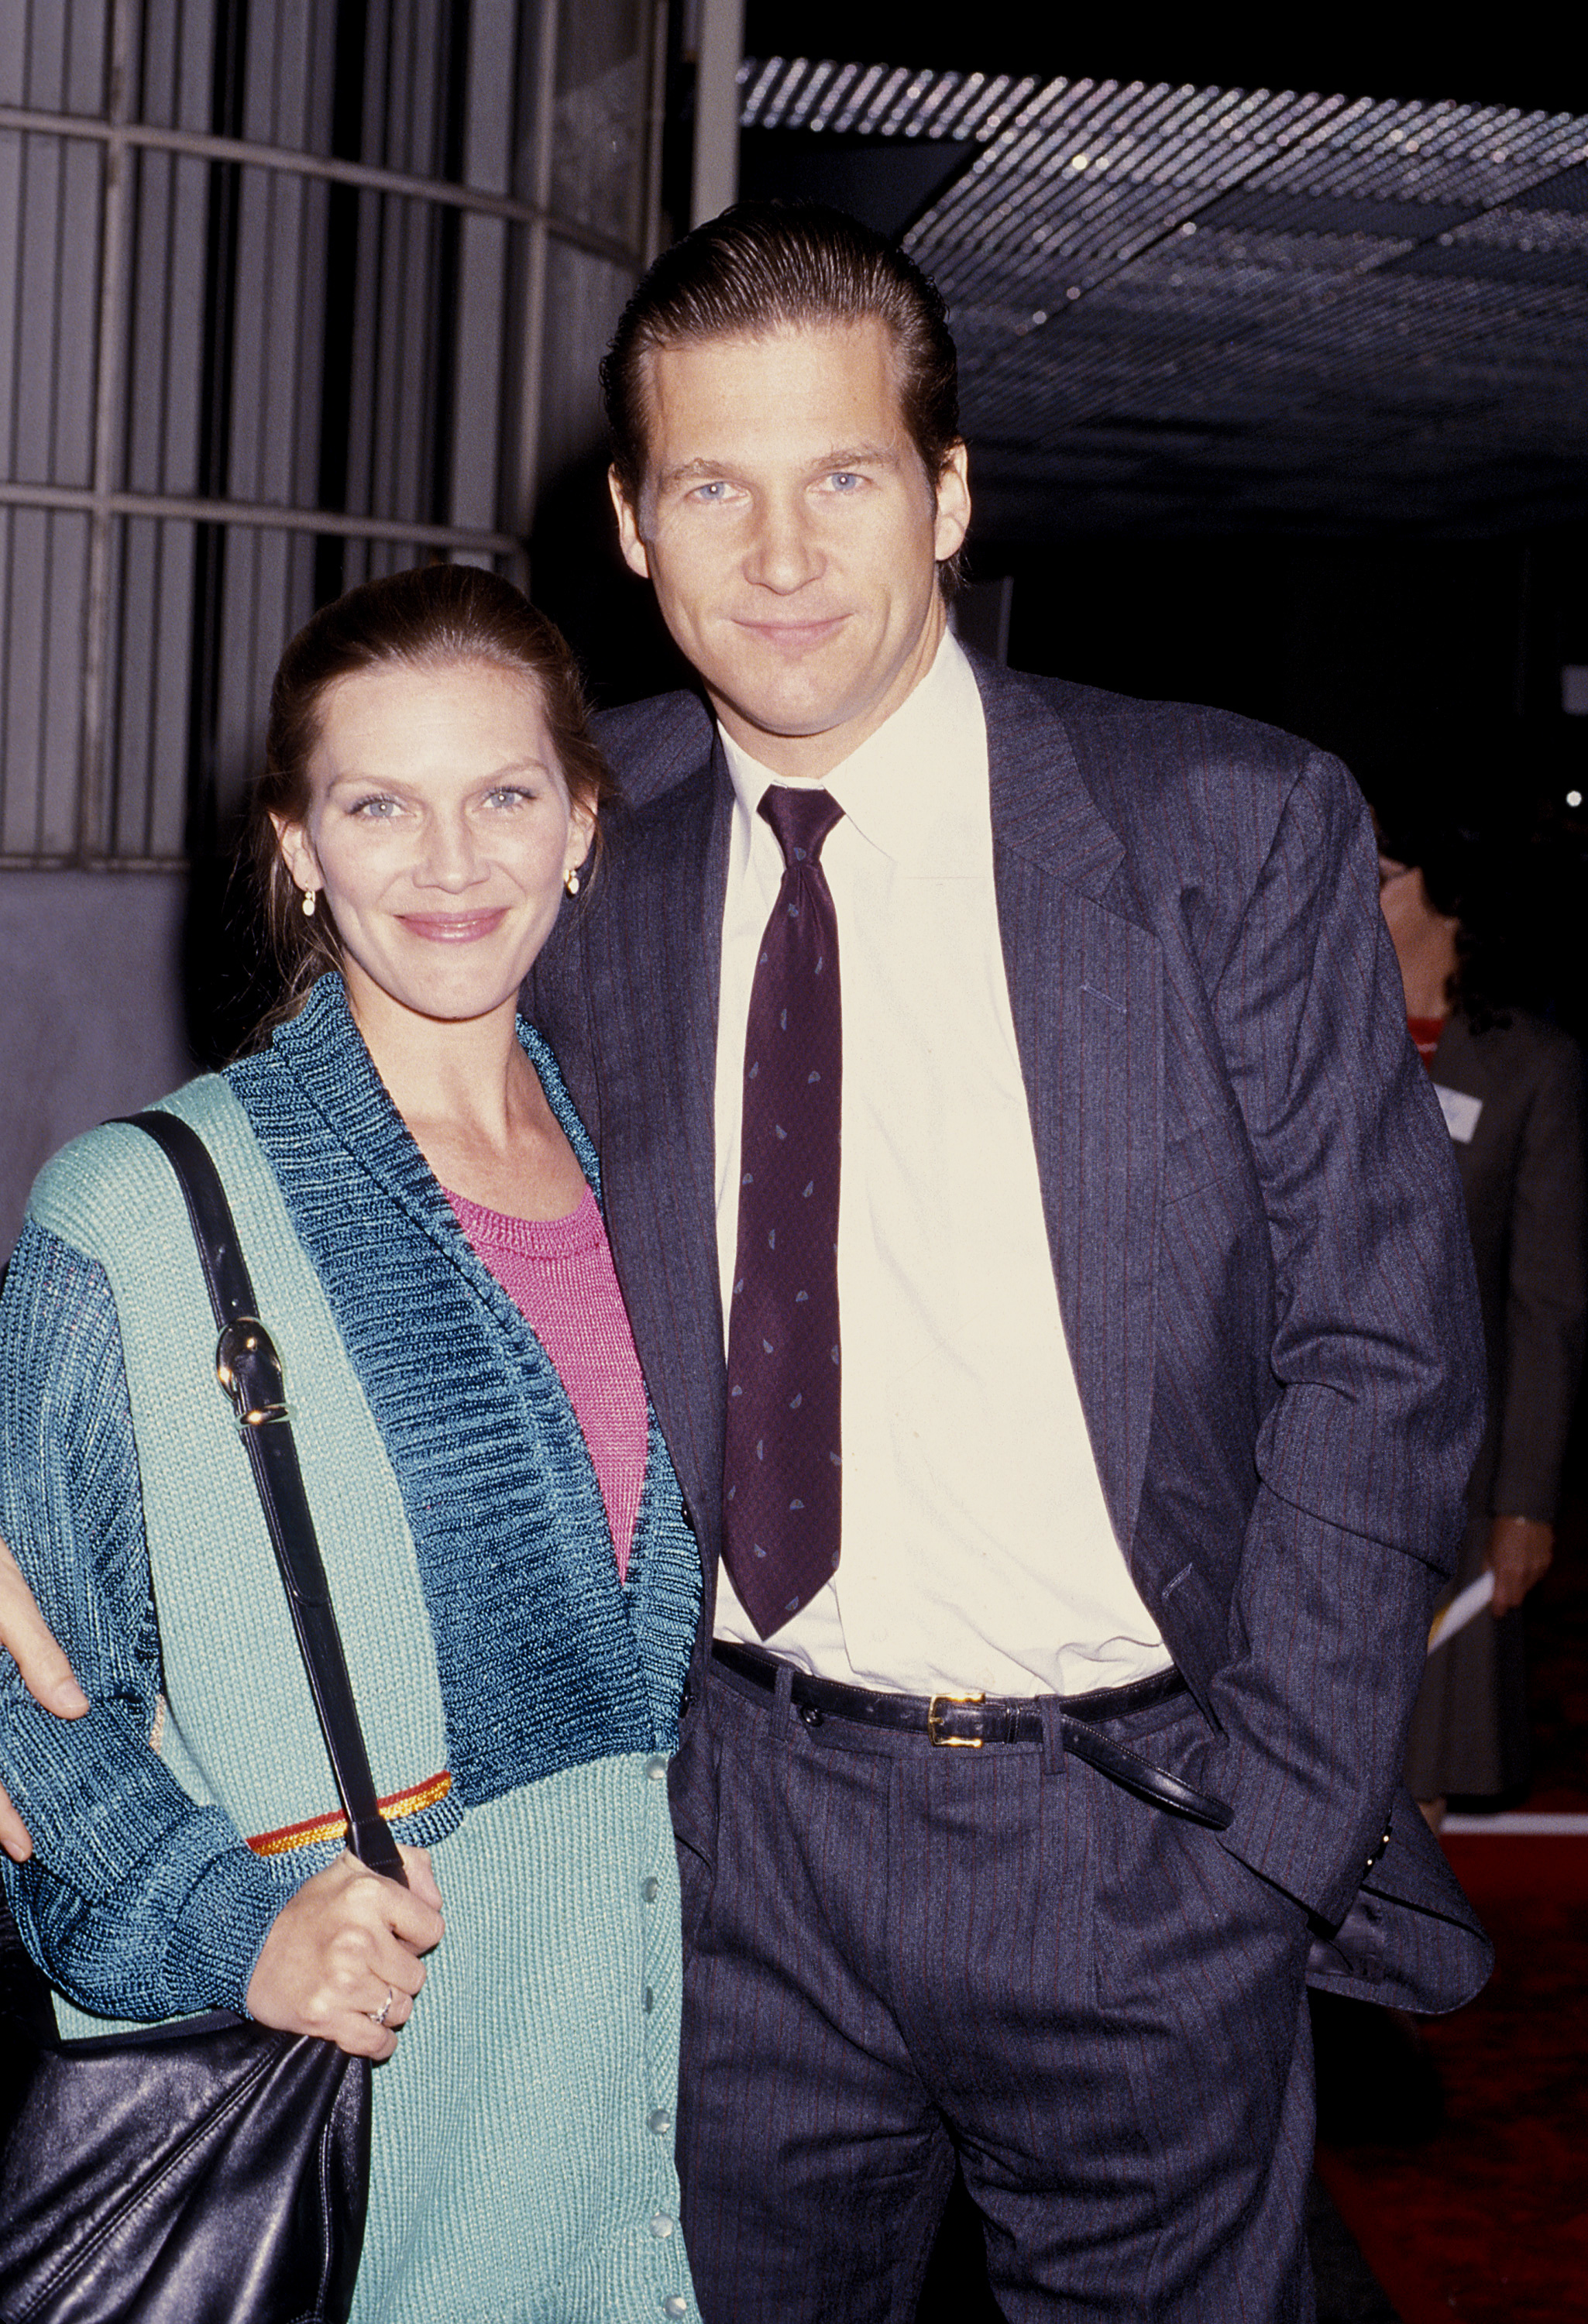 Susan and Jeff Bridges in California in 1986 | Source: Getty Images